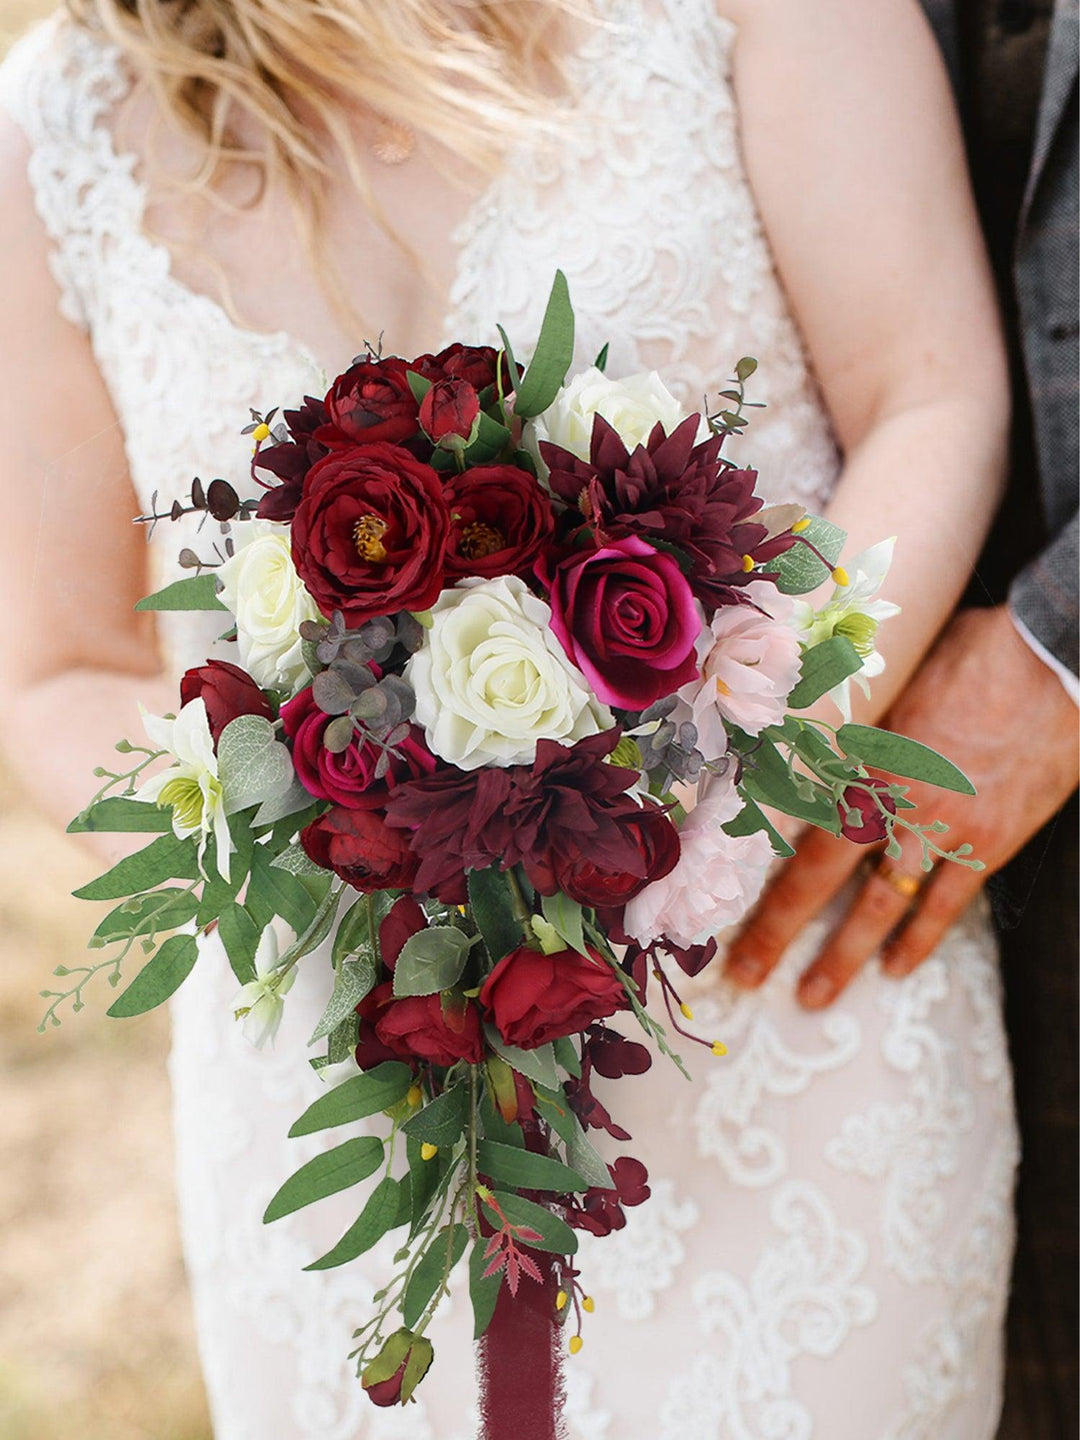 Why Burgundy Bridal Bouquets are the Trending Choice for Modern Brides? - Rinlong Flower